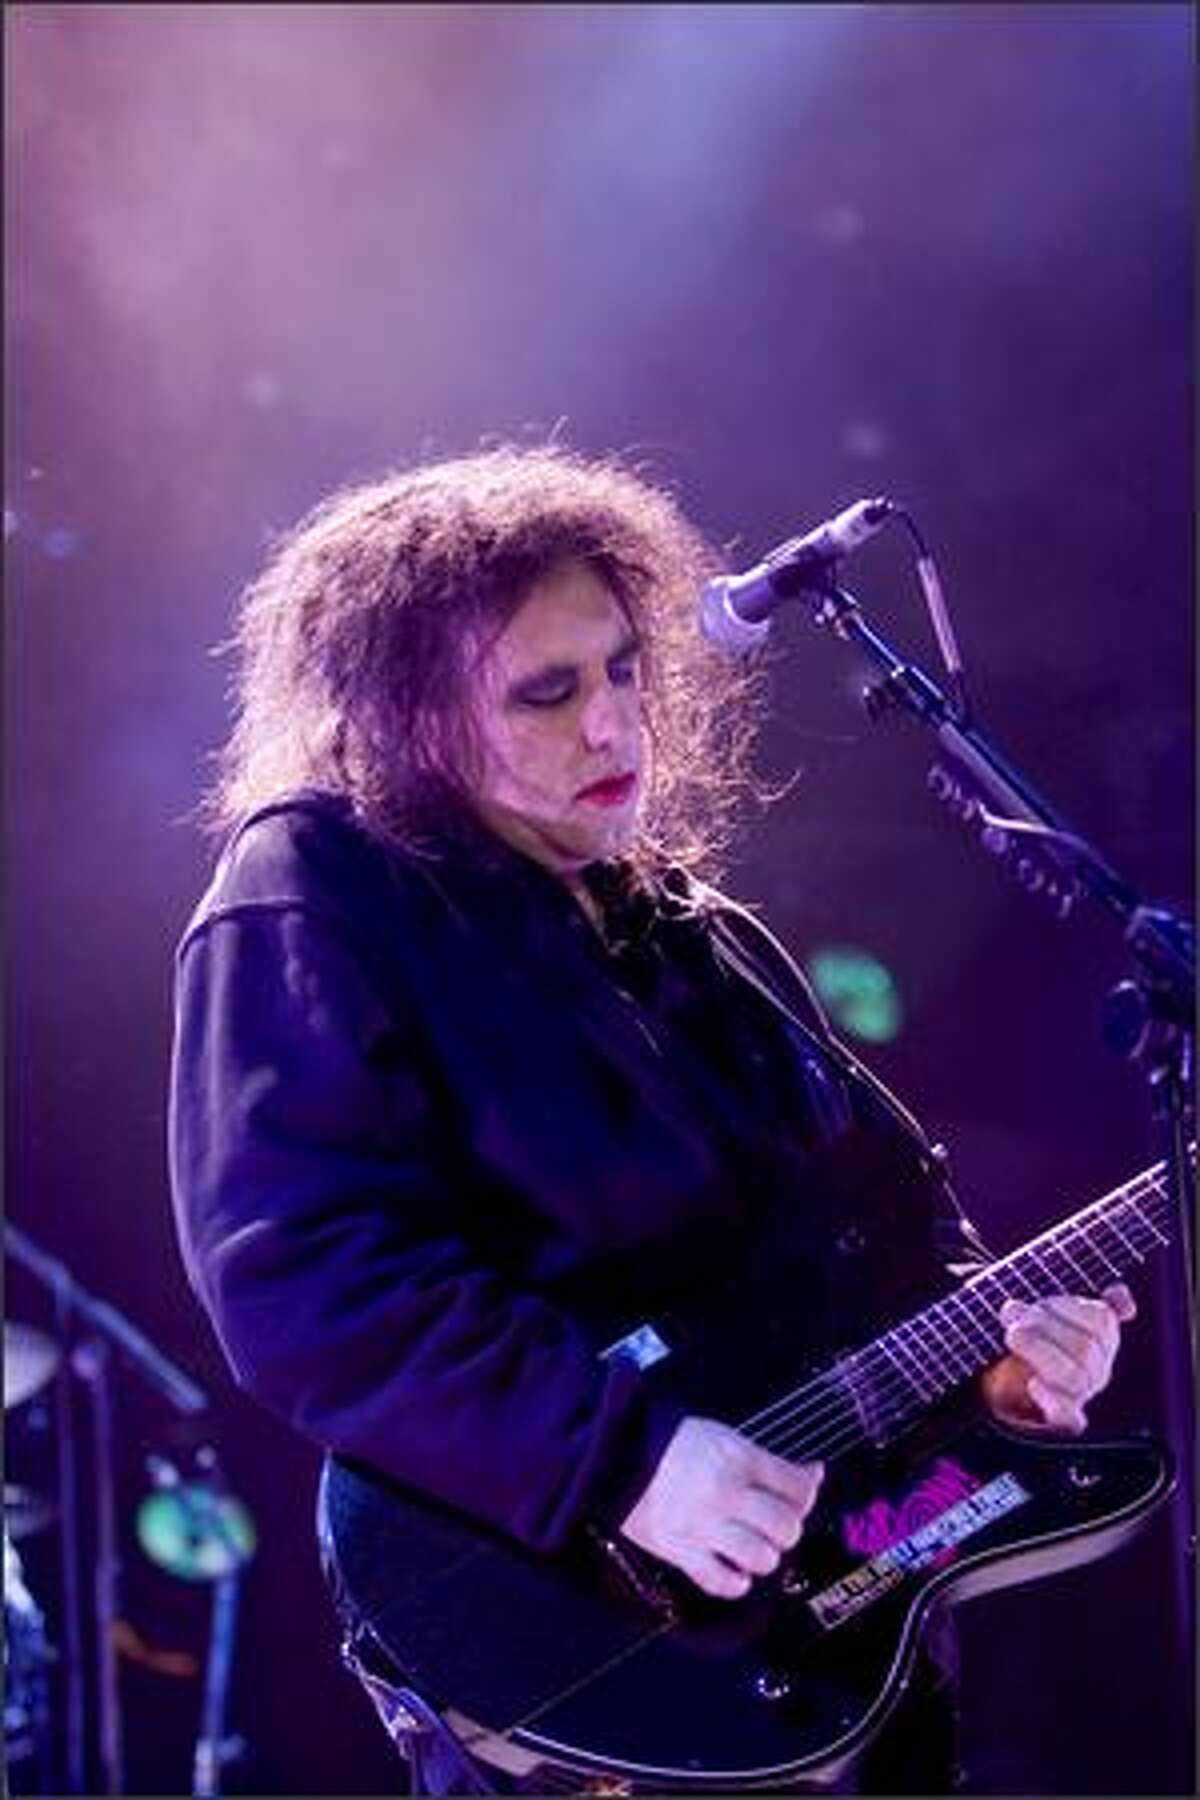 Robert Smith of The Cure performs at the Sasquatch Music Festival on Saturday.